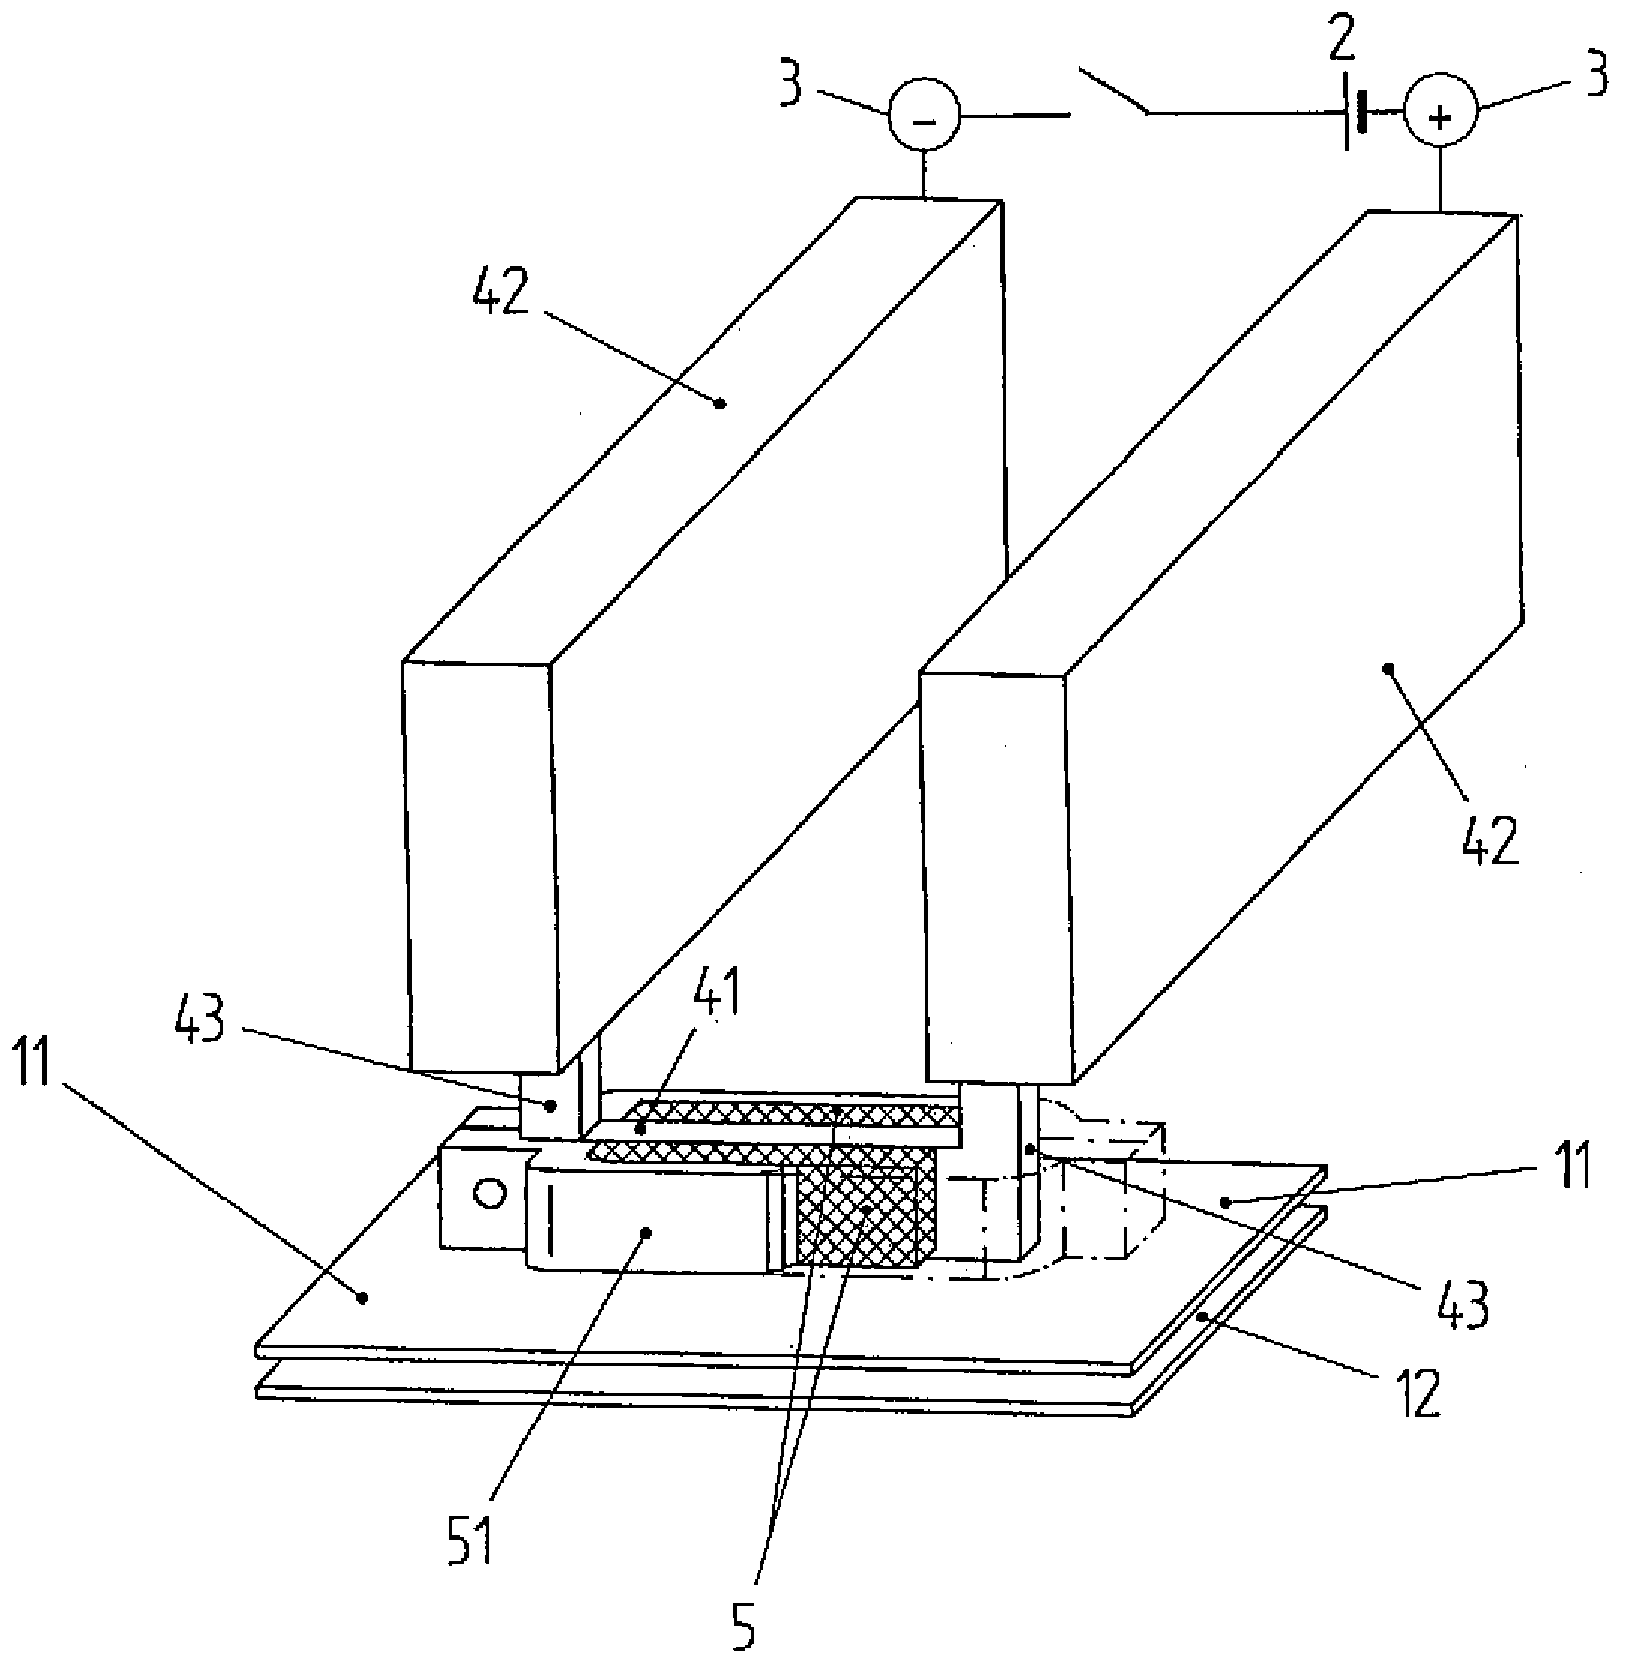 Electromagnetic pulse welding device for welding metal sheets using cooling insulator